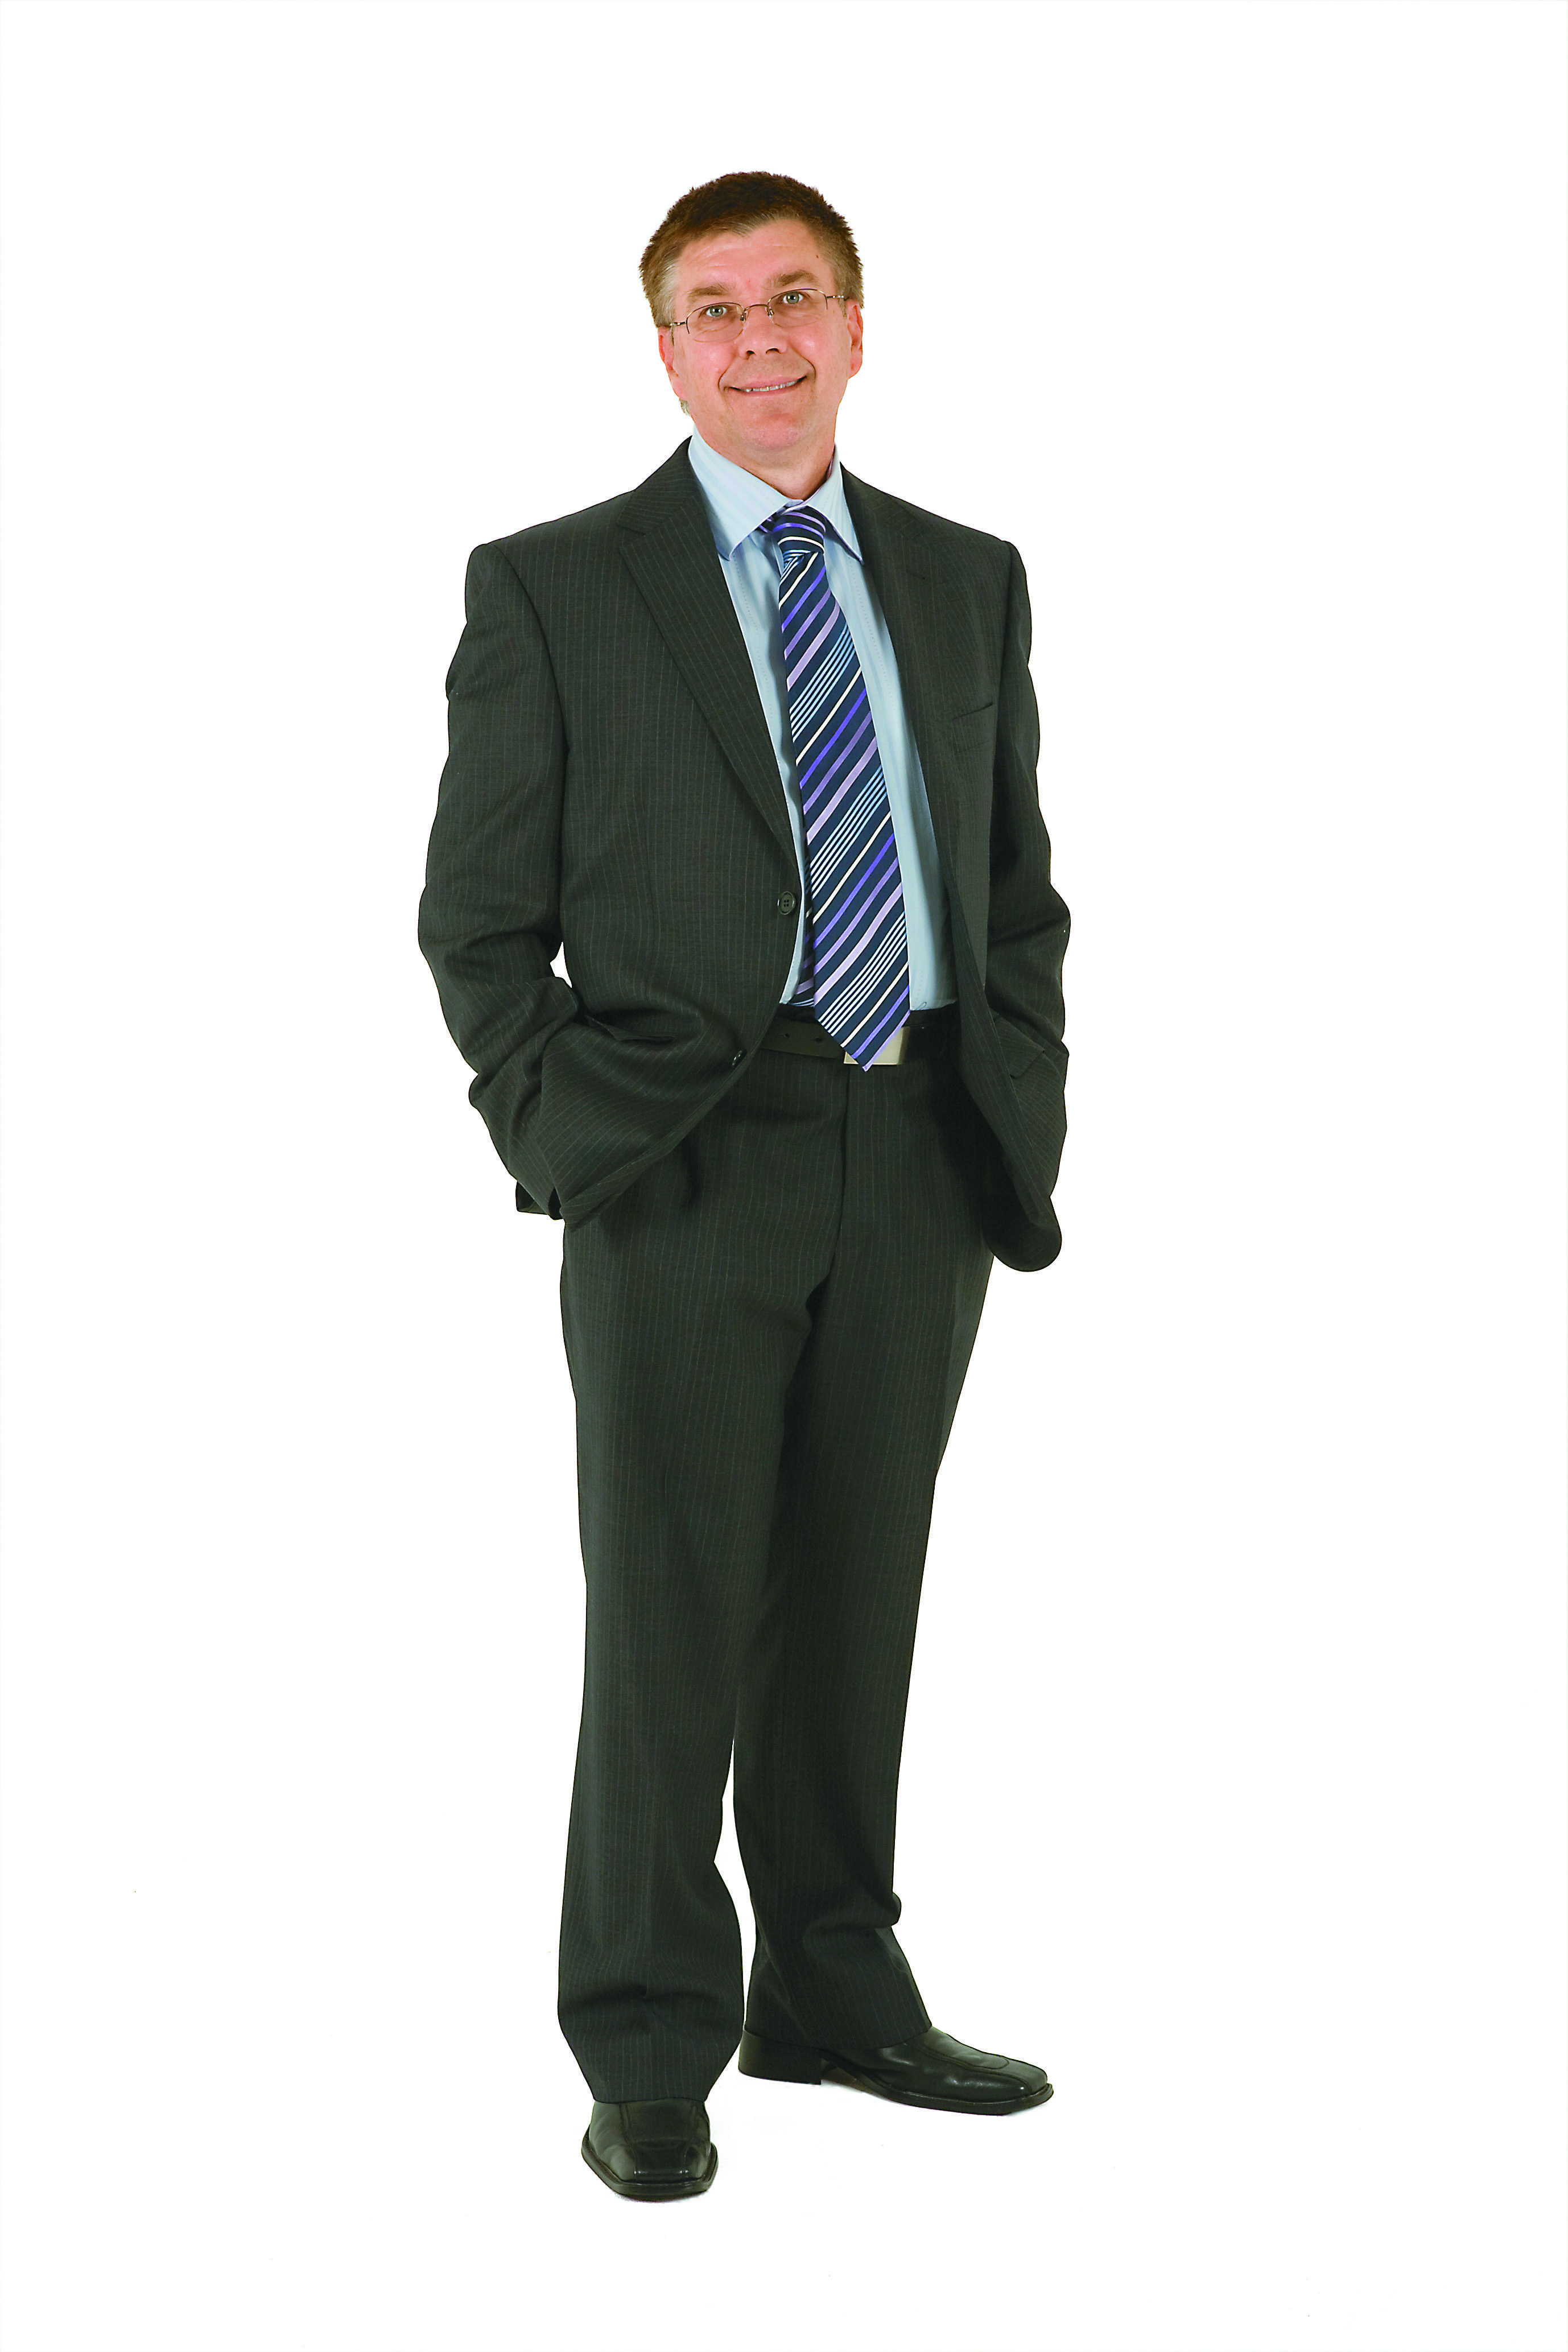 Michael Quinn - Accountant and Lawyer Sydney